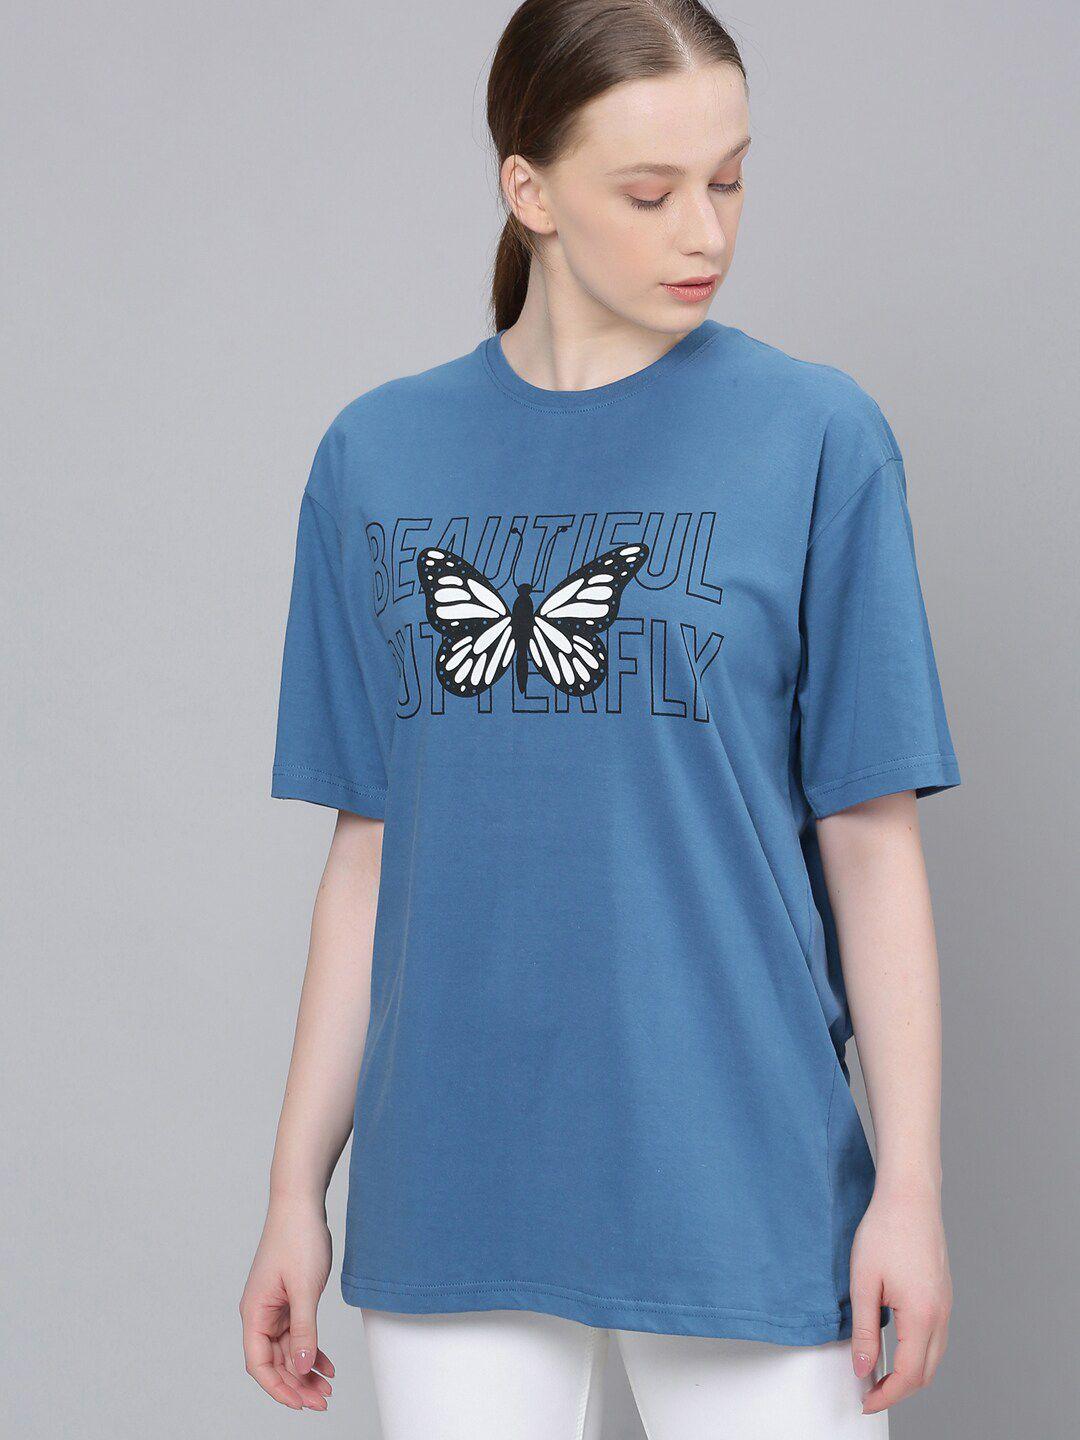 dillinger-women-blue-printed-round-neck-oversized-pure-cotton-t-shirt